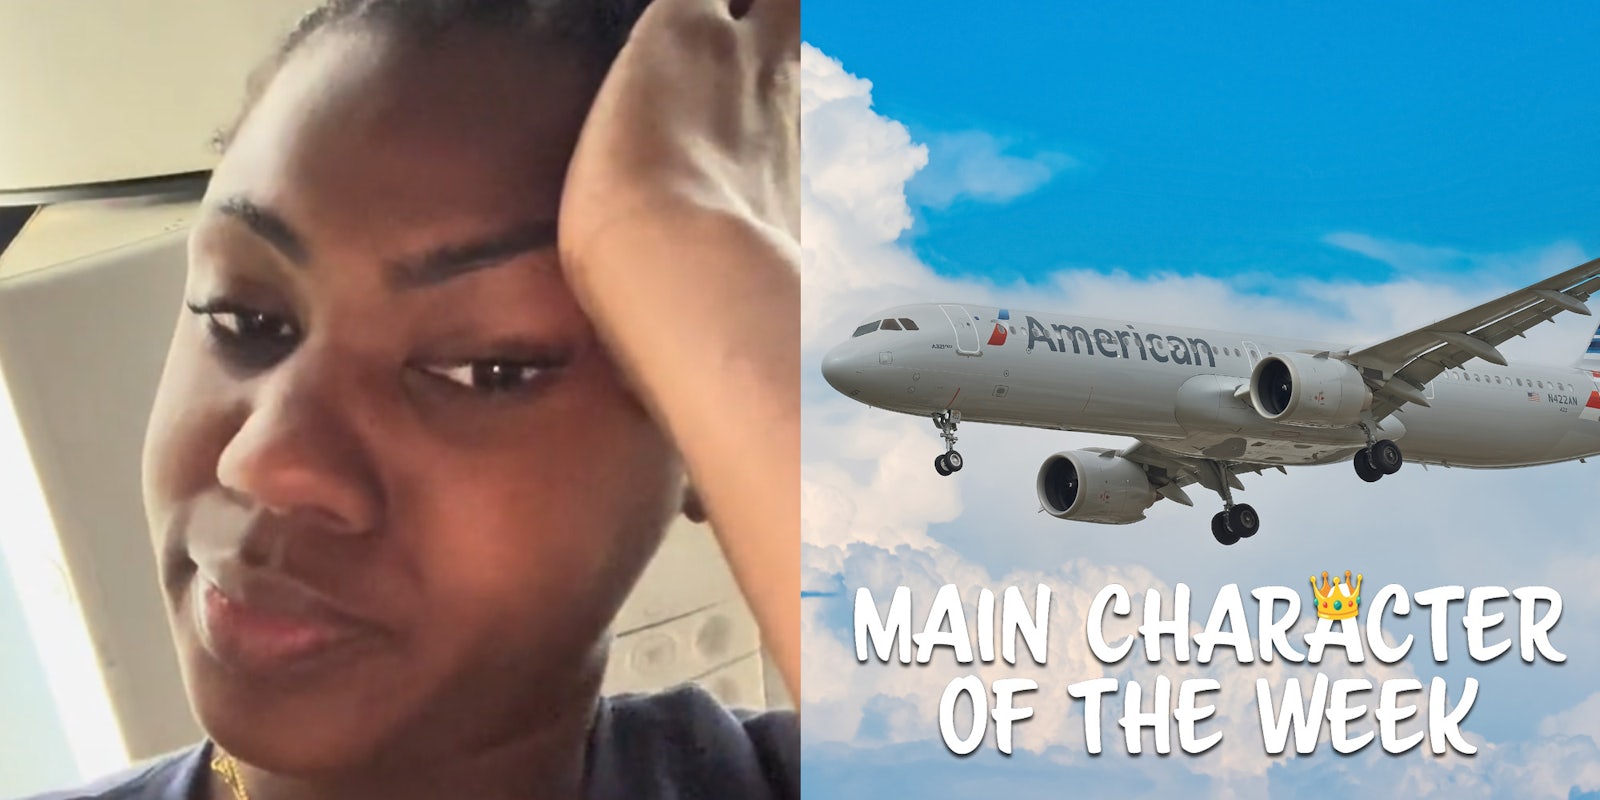 A person looking at the camera next to an American Airlines flight. There is text that says main character of the week in a Daily Dot newsletter web_crawlr font.